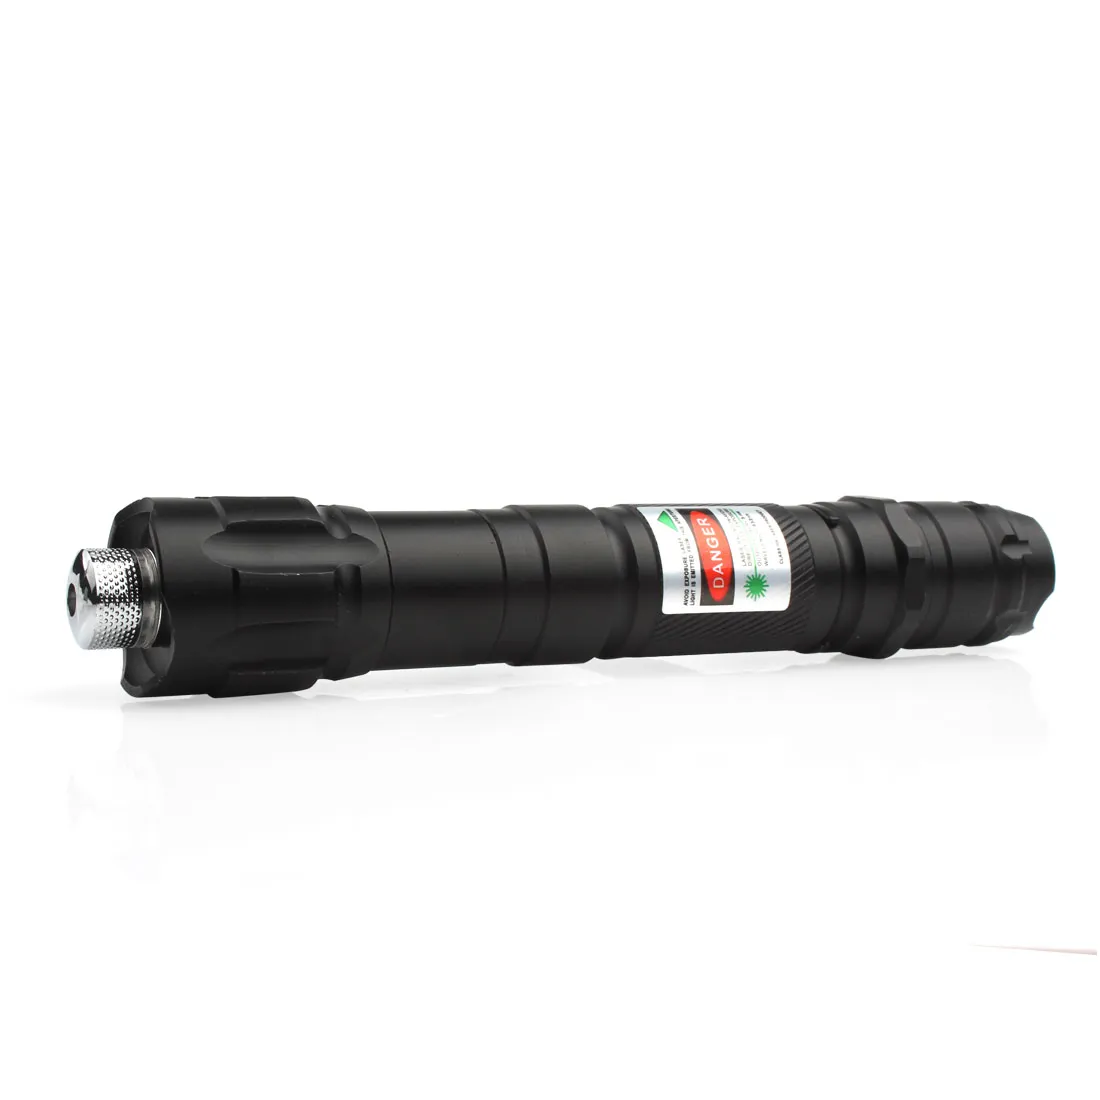 High Power 532Nm Tactical Laser Grade Green Pointer Strong Pen Lasers Lazer Pleil Lampe militaire Clip puissant Twinkling Star 6681057